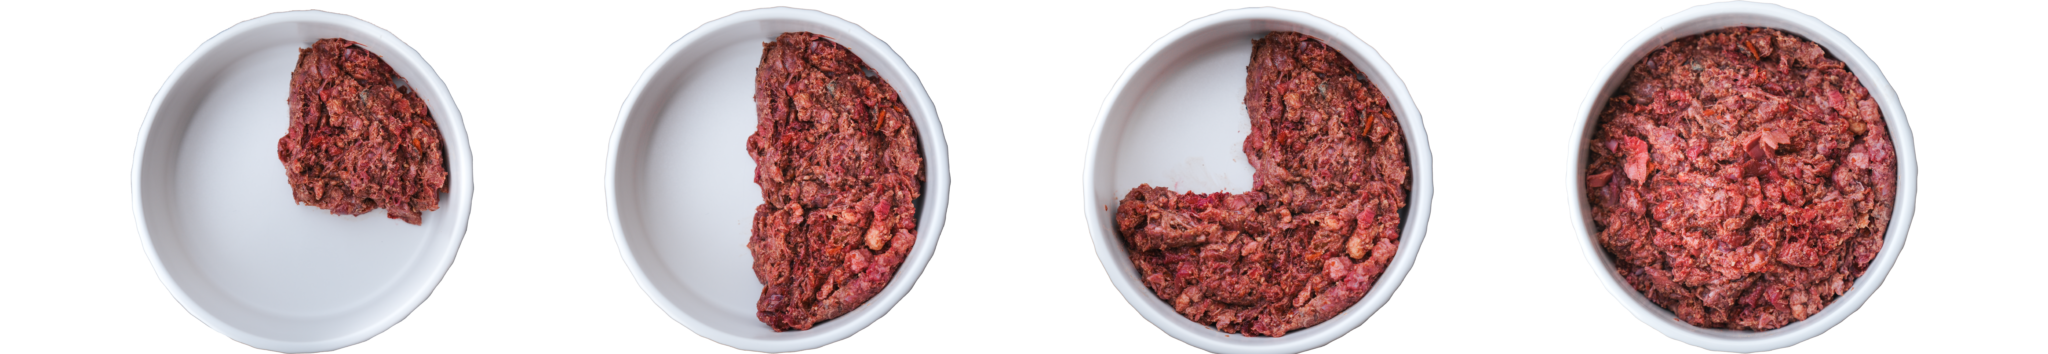 Transitioning from kibble to raw dog food